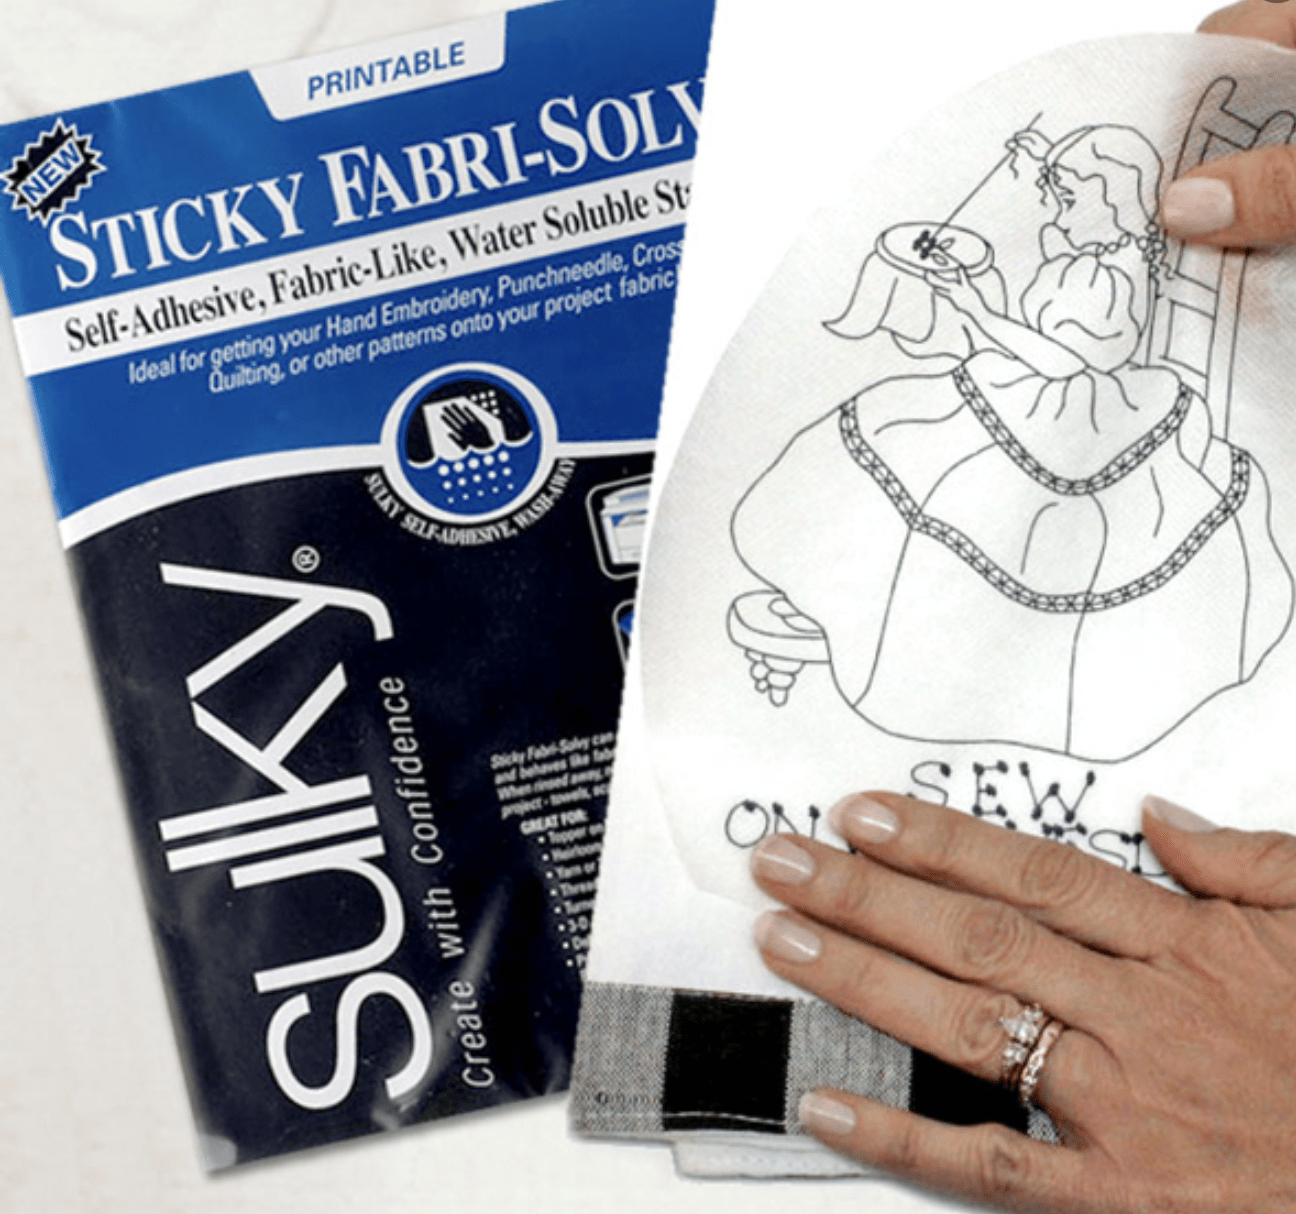 Sticky Fabri-solvy Adhesive Printable Sulky Temporary Water Soluble  Stabilizer for Embroidery, Quilting, Applique 